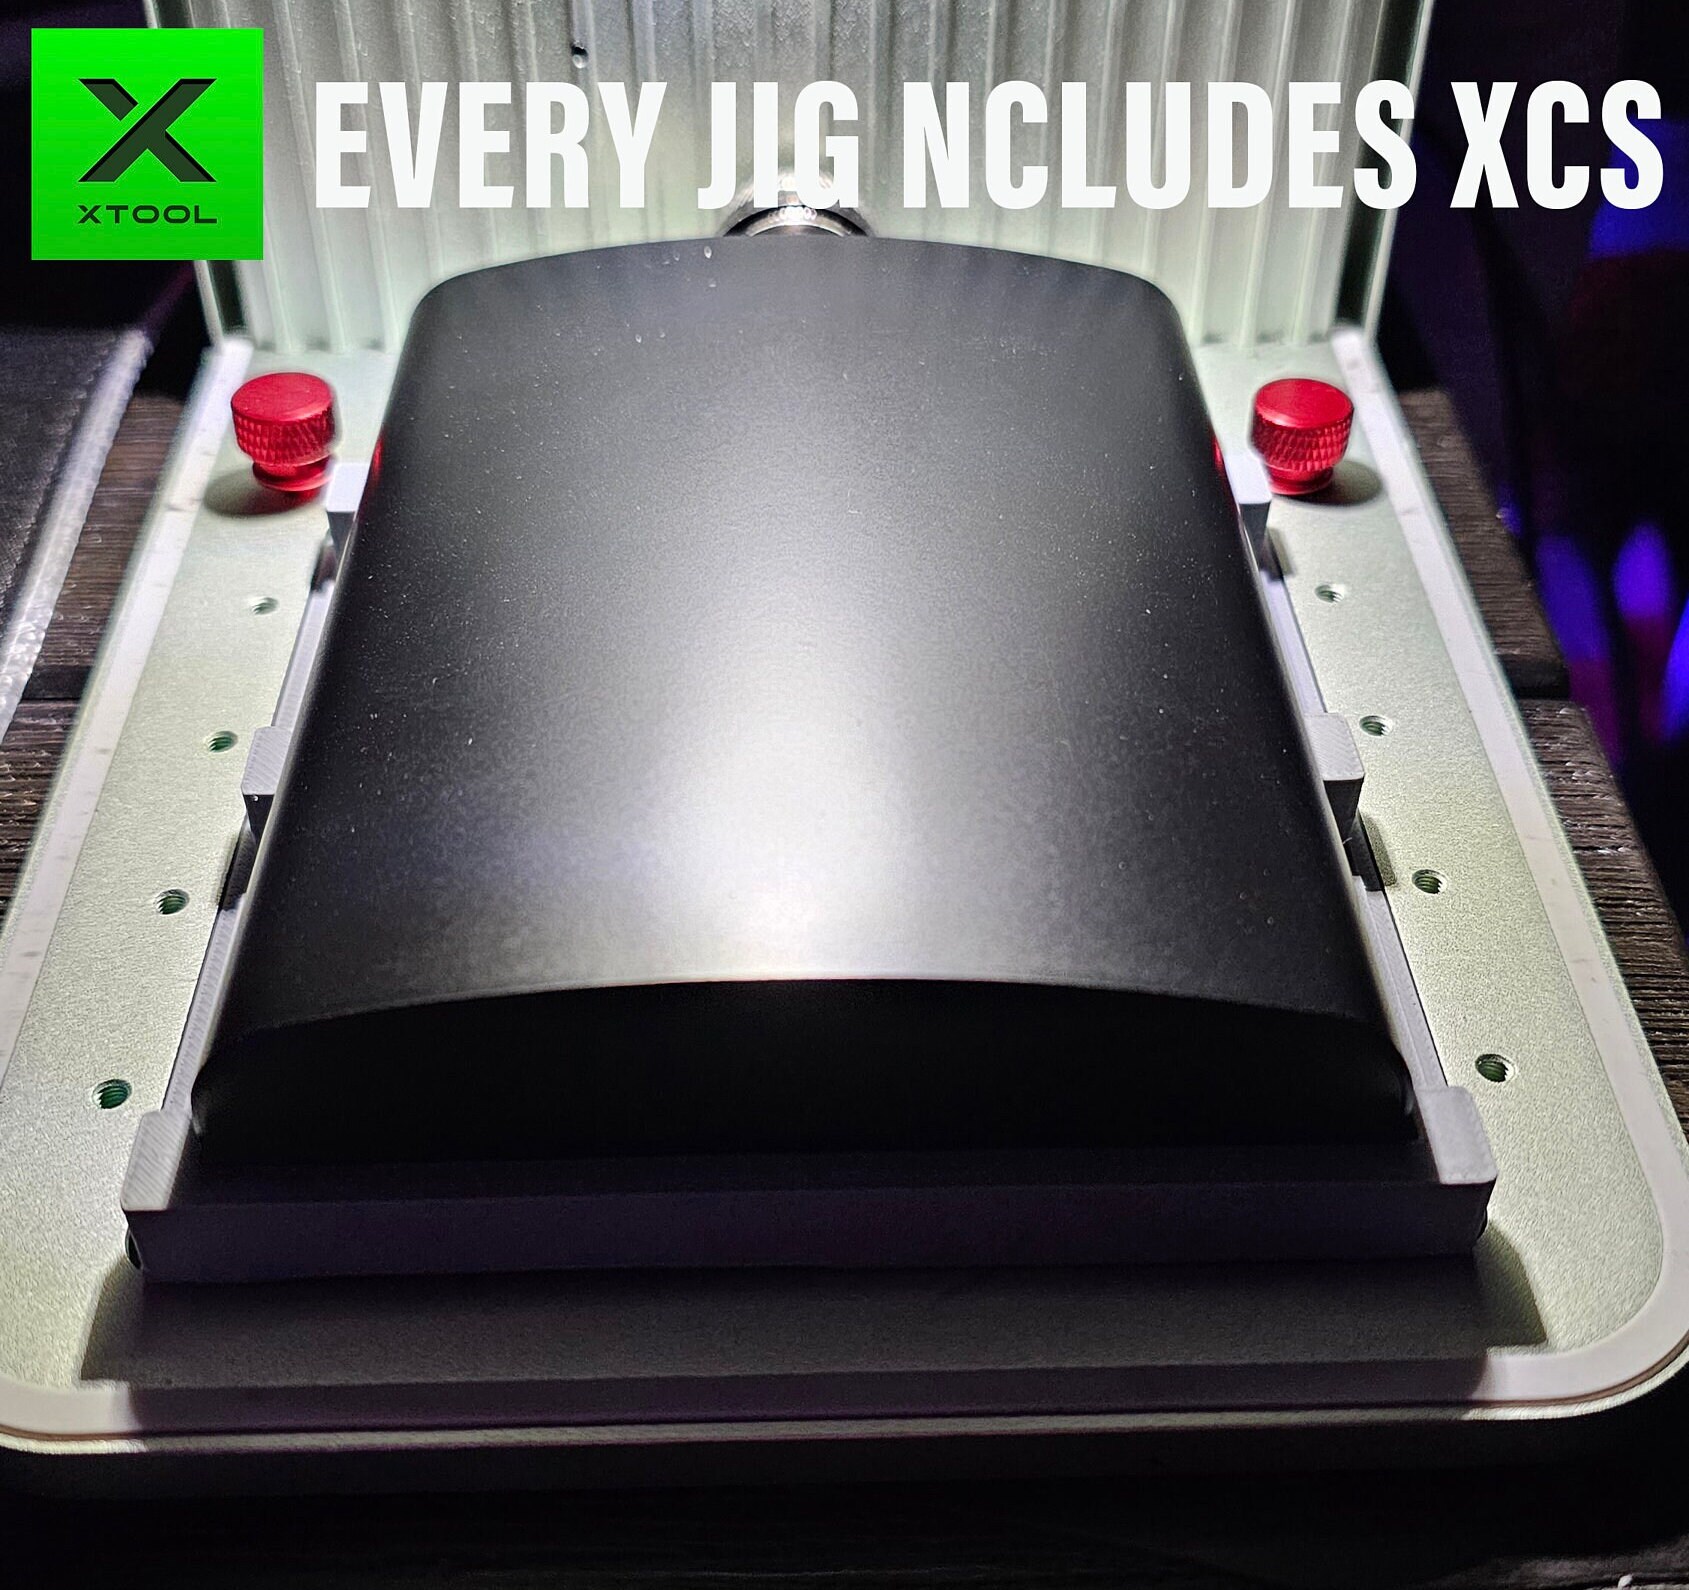 9 Must Have Laser Engraver Accessories - xTool